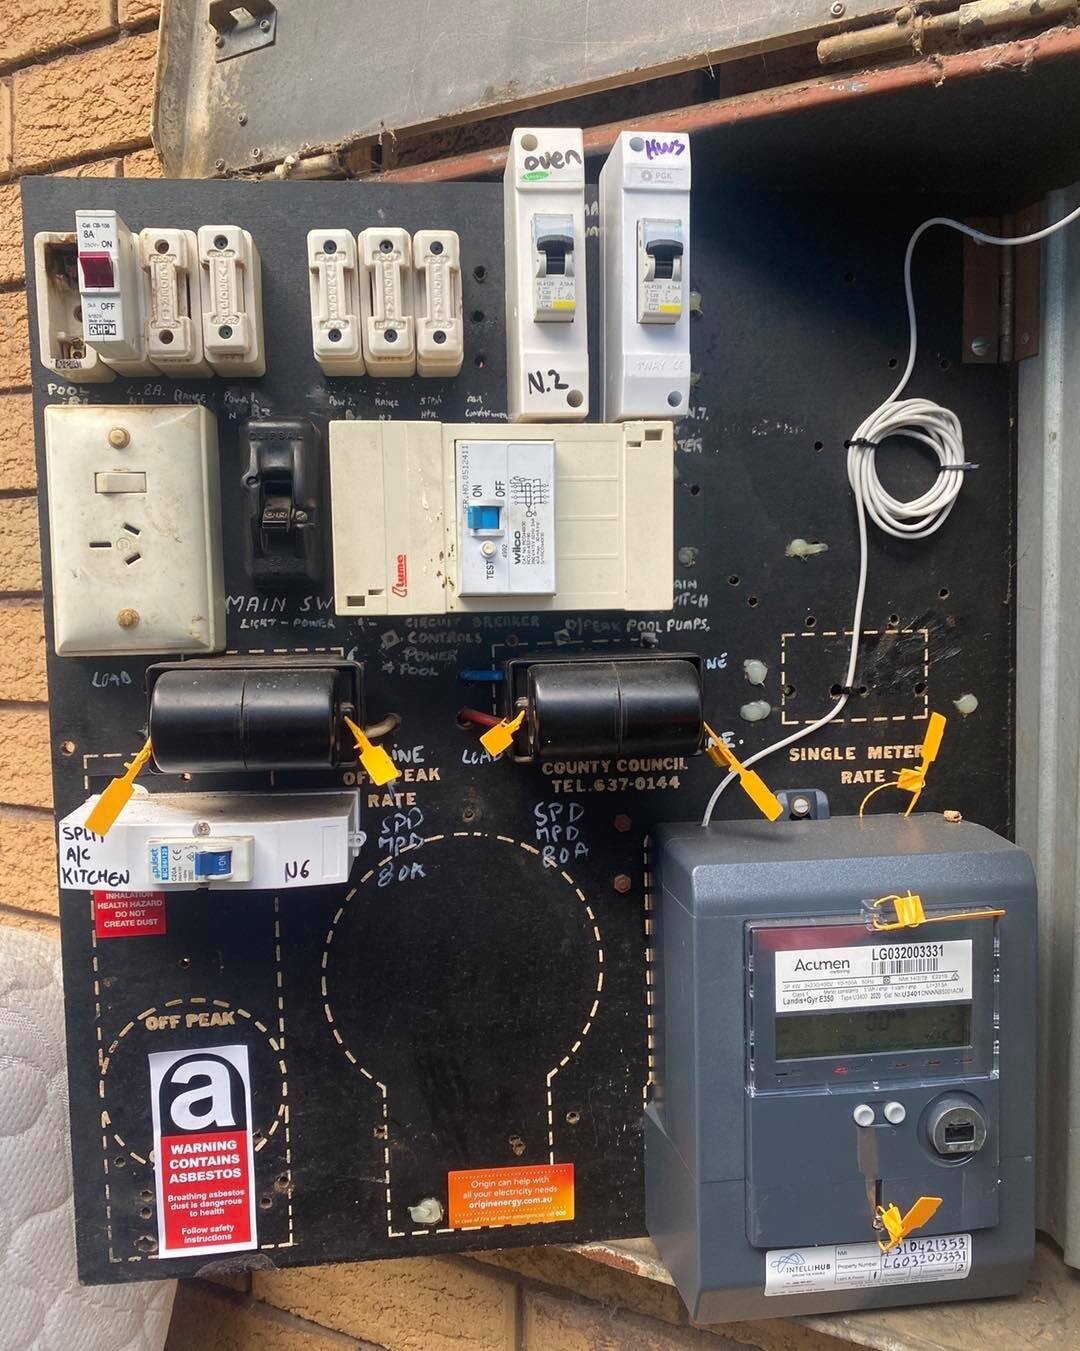 ❓Why do we recommend switch board upgrades❓

Fixed RCD protection reduces the risk of electric shock to people. It can also protect your property against the risk of fire caused by faulty wiring or appliances (See Photo #2!). We&rsquo;ve found that f